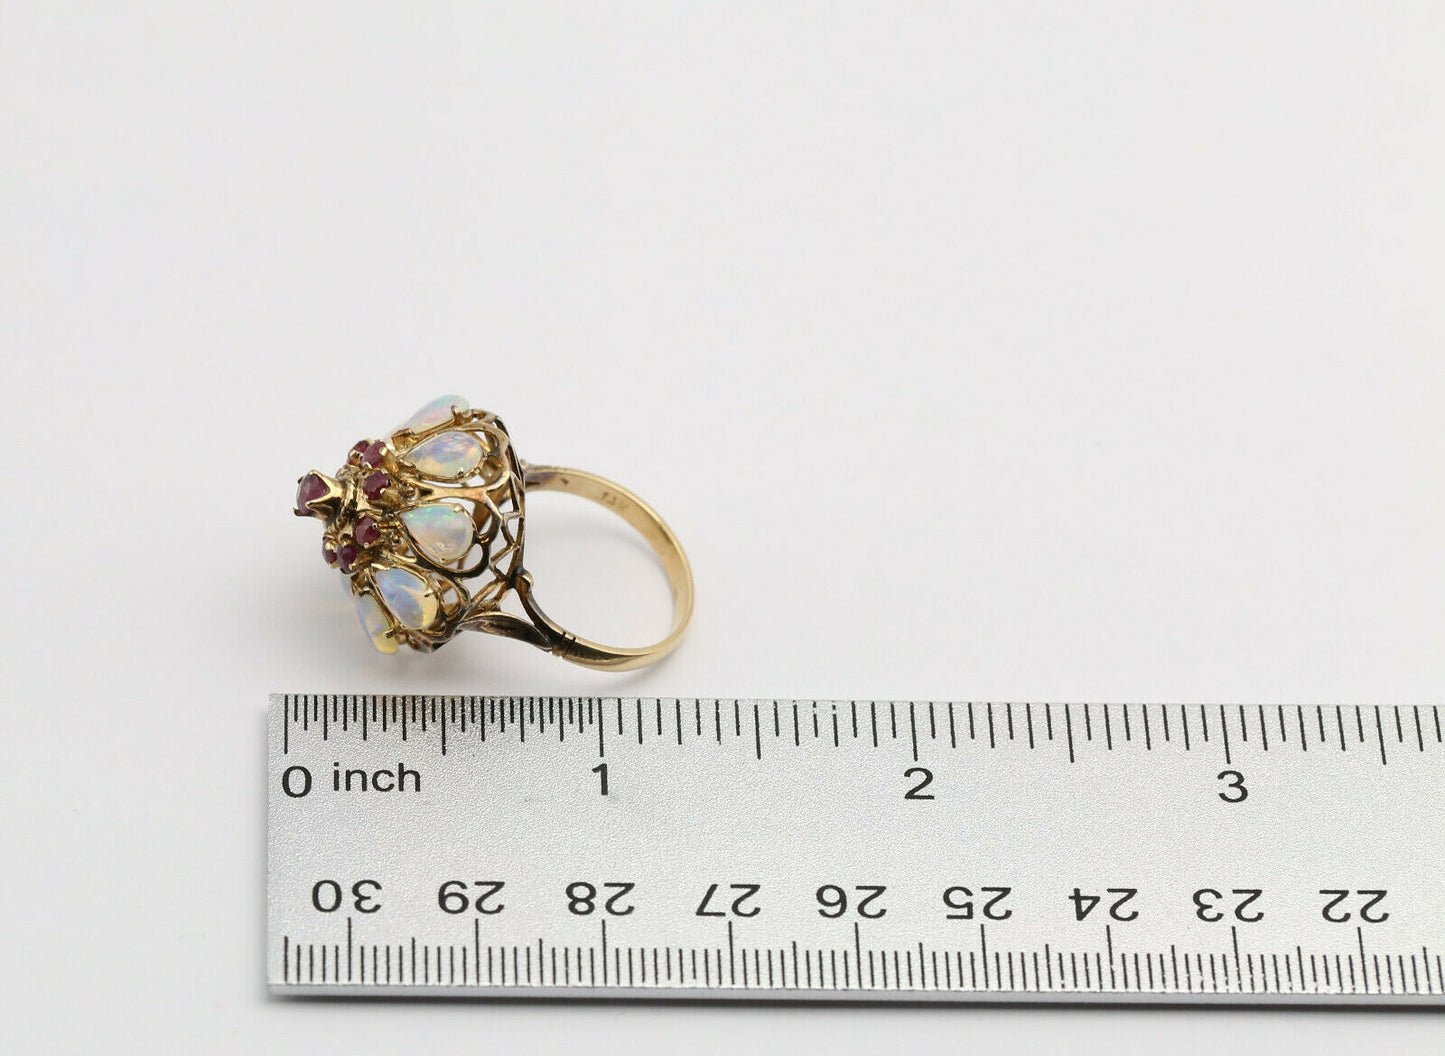 Vintage 14k Yellow Gold Cocktail Ring with Opal & Rubies, Size 7 - 6.1g